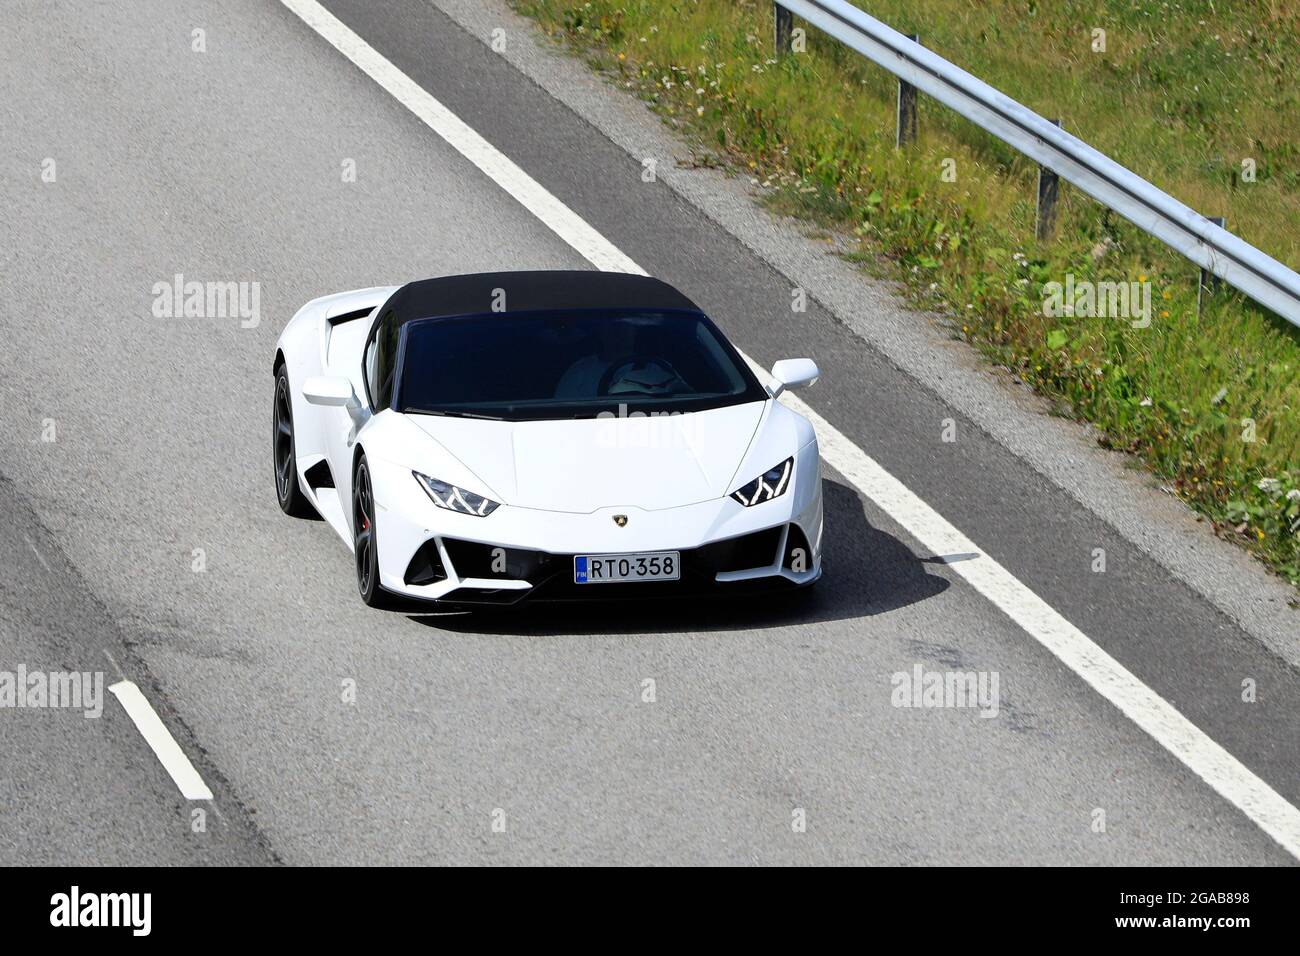 White Lamborghini Huracán LP 580-2 Spyder supercar at speed on motorway E18, elevated view. Salo, Finland. July 23, 2021. Stock Photo